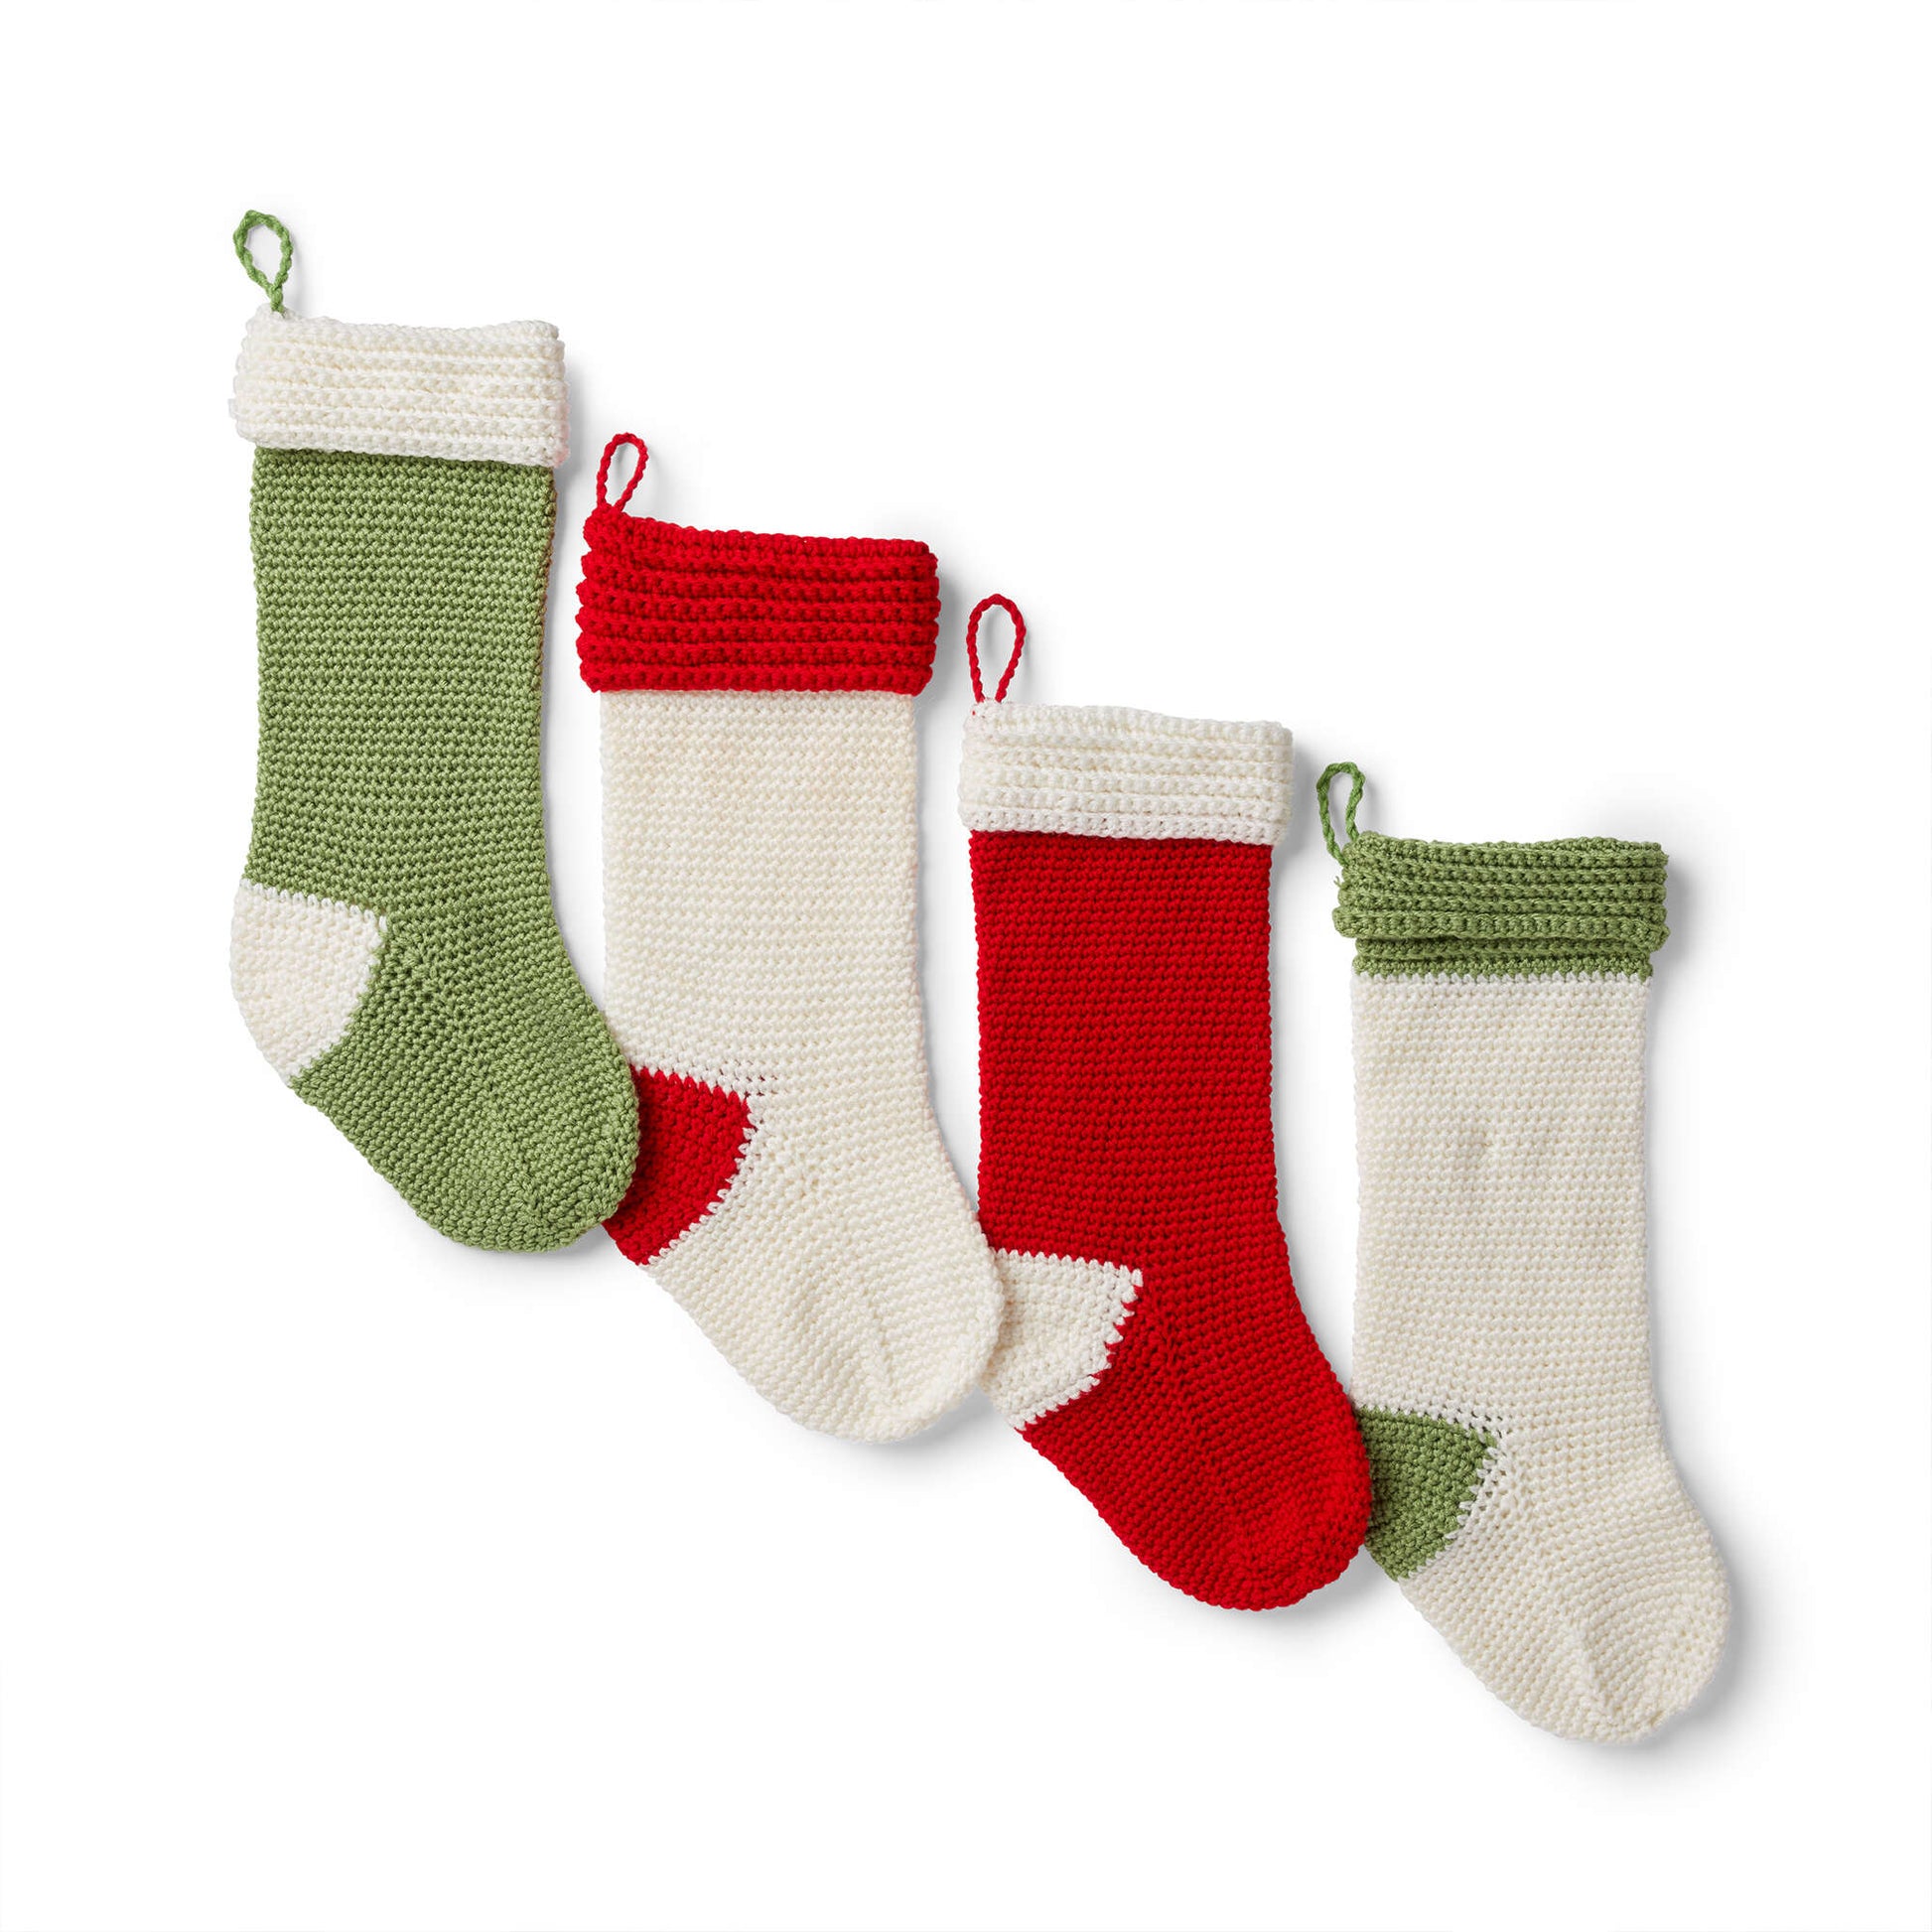 Free Red Heart Holiday Crochet Stocking Pattern